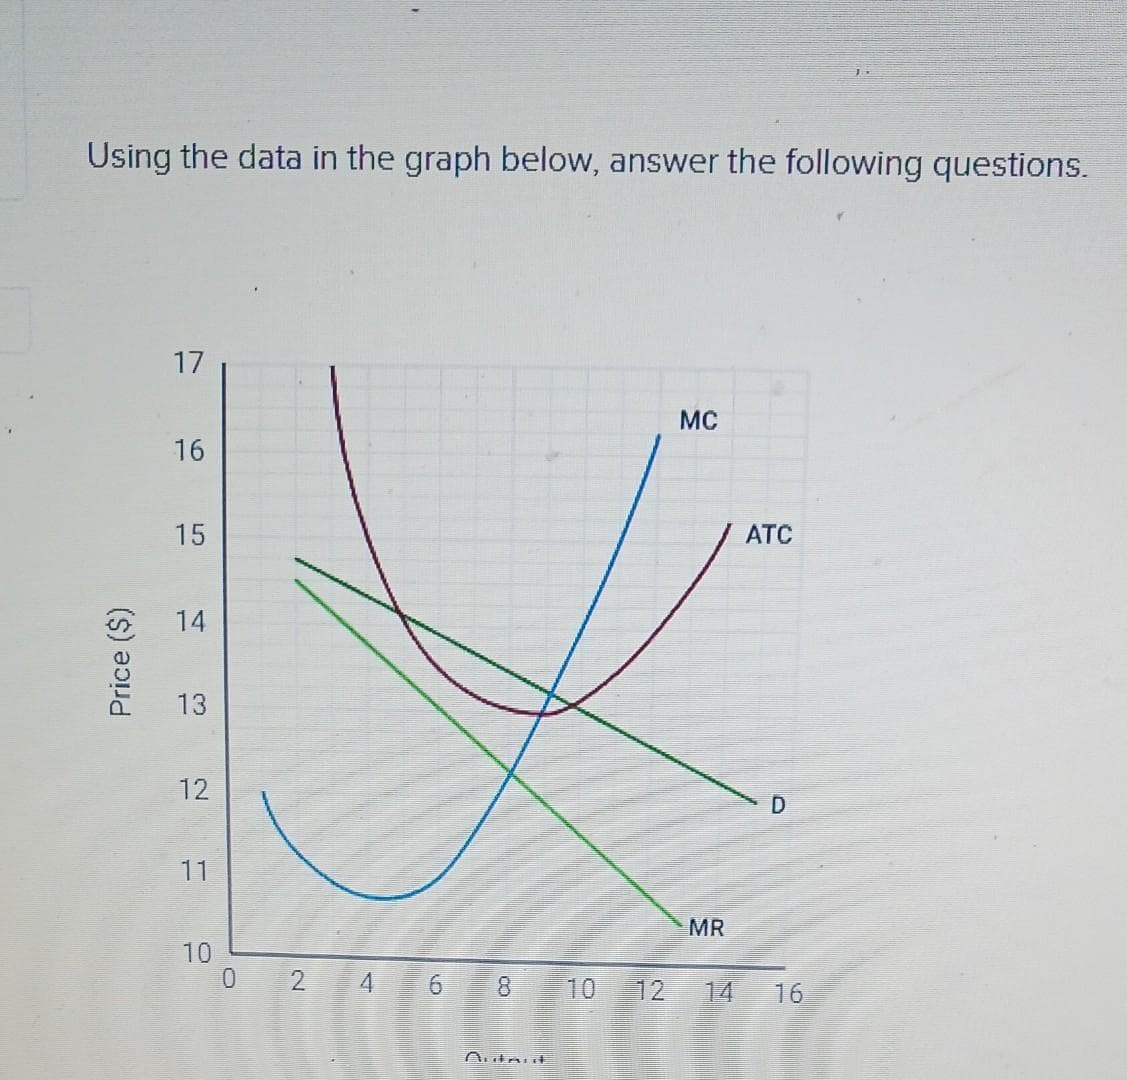 Using the data in the graph below, answer the following questions.
Price ($)
17
16
15
14
13
12
11
10
0
2
4
6
8
Autant
10 12
MC
MR
14
ATC
D
16